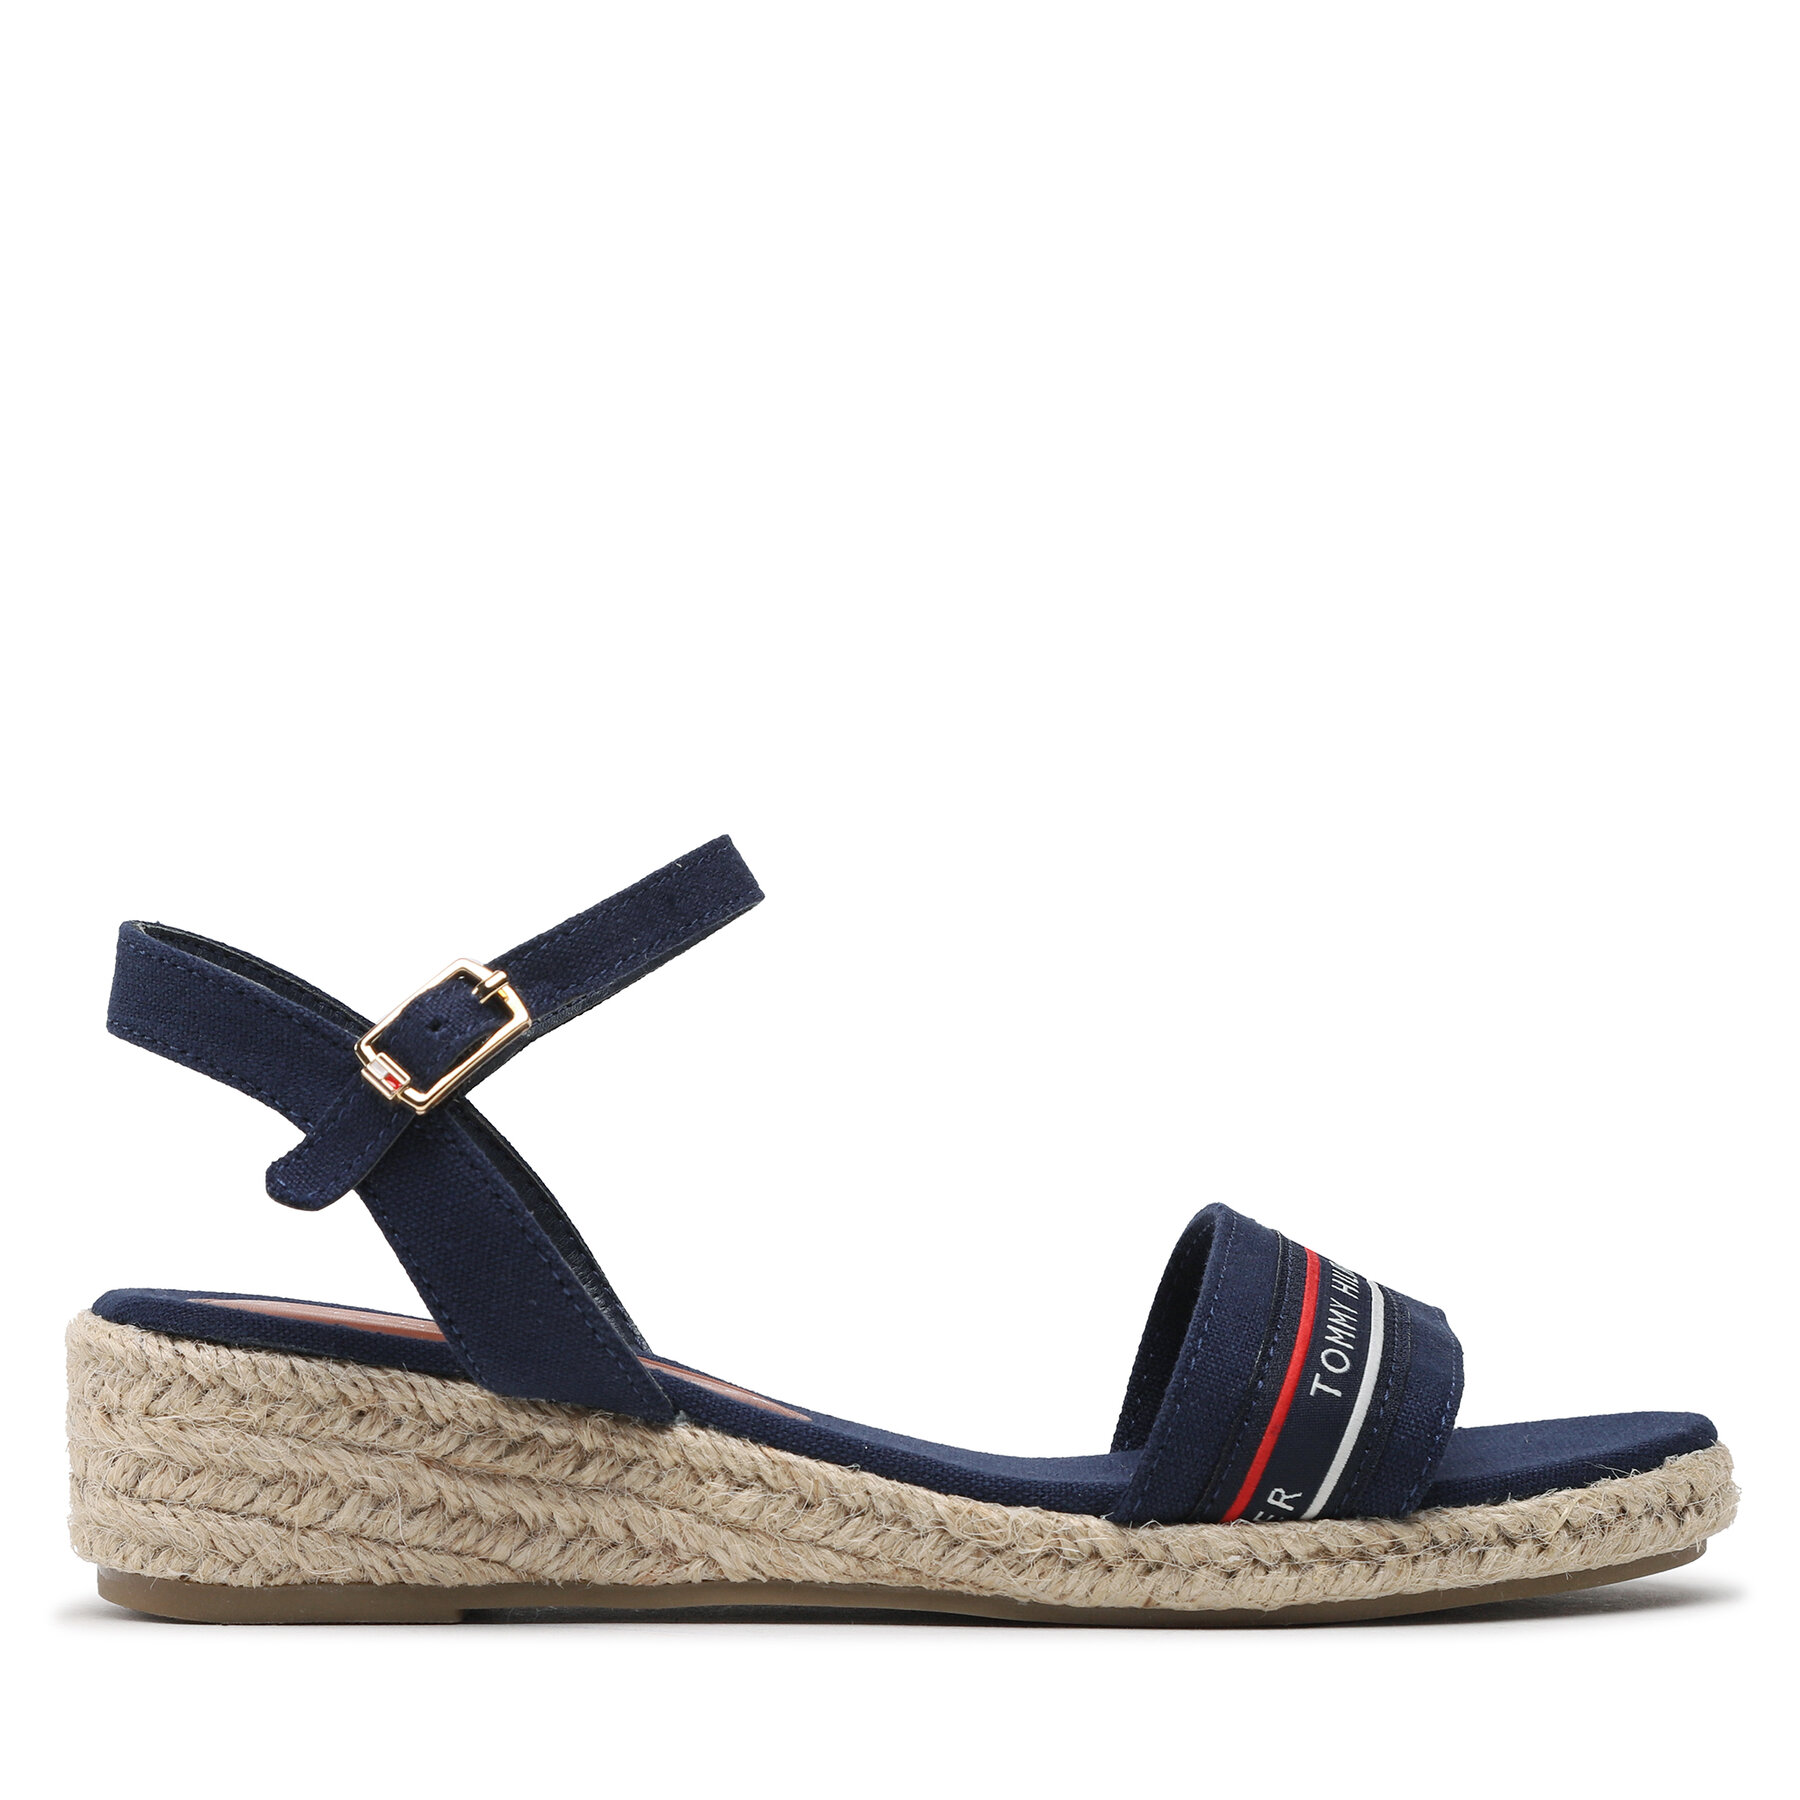 Espadrillos Tommy Hilfiger Rope Wedge Sandal T3A7-32777-0048 S Blue 800